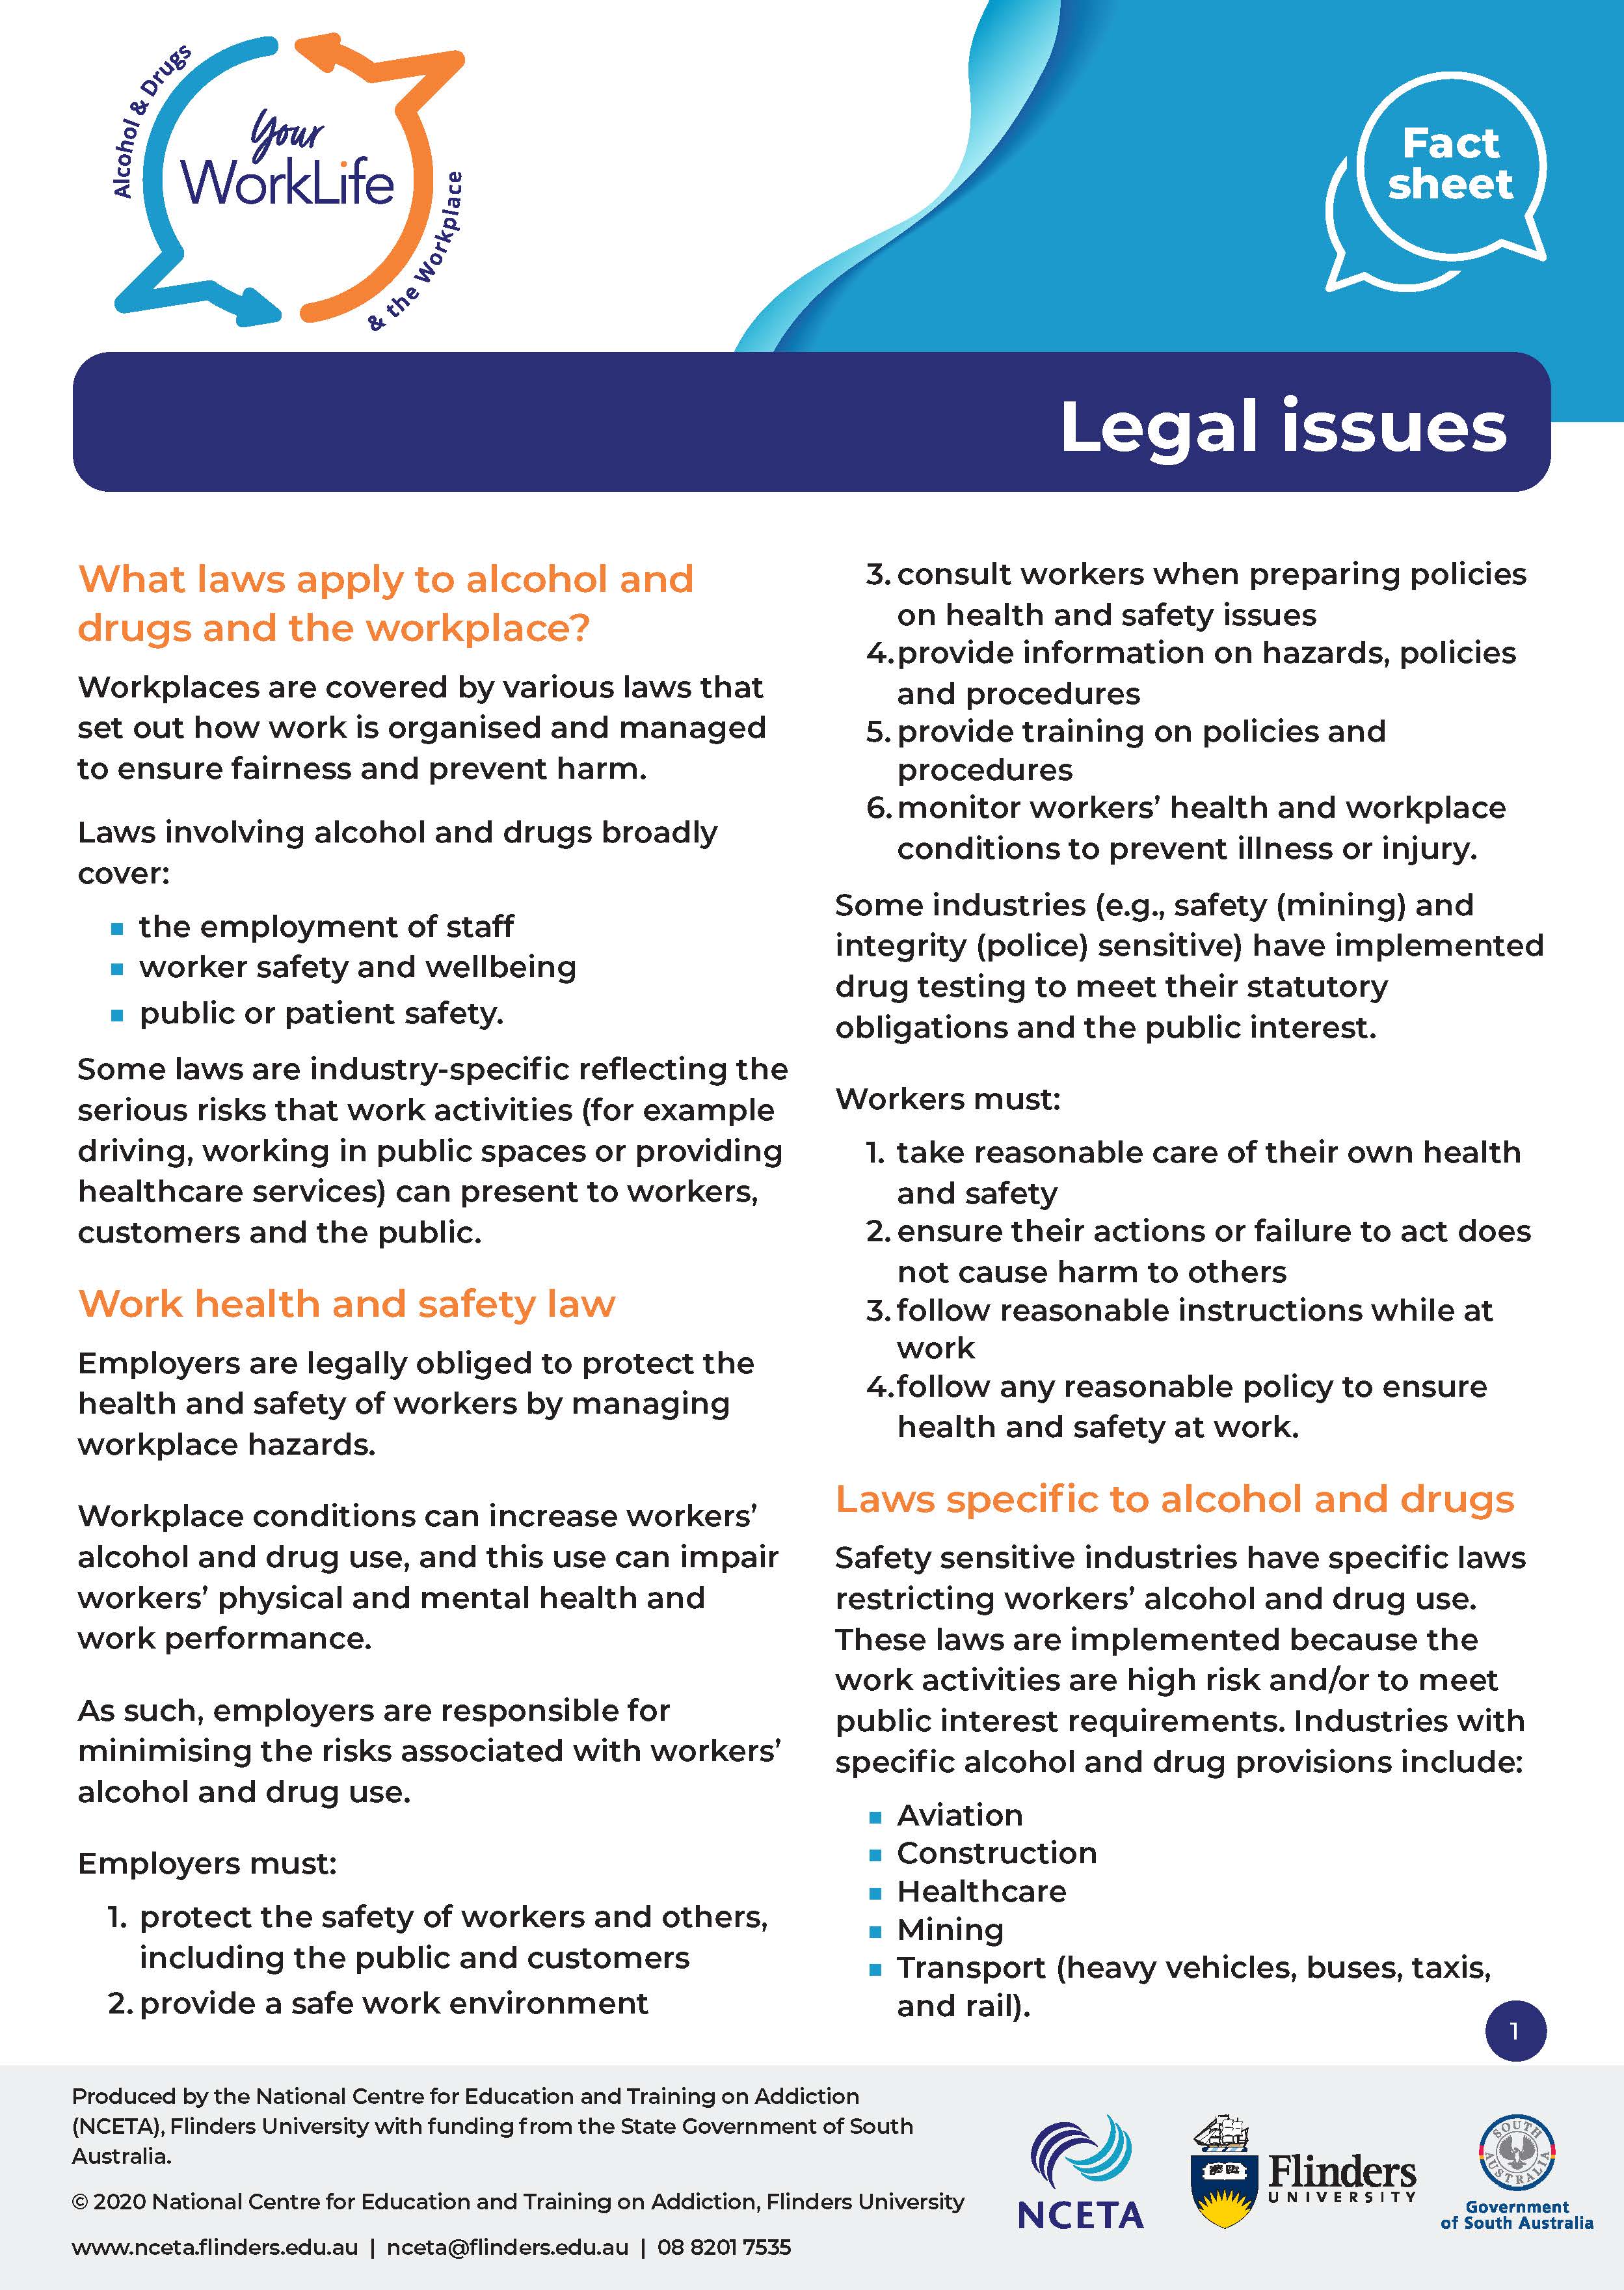 Front page fact-sheet-legal-issues 20200505.jpg